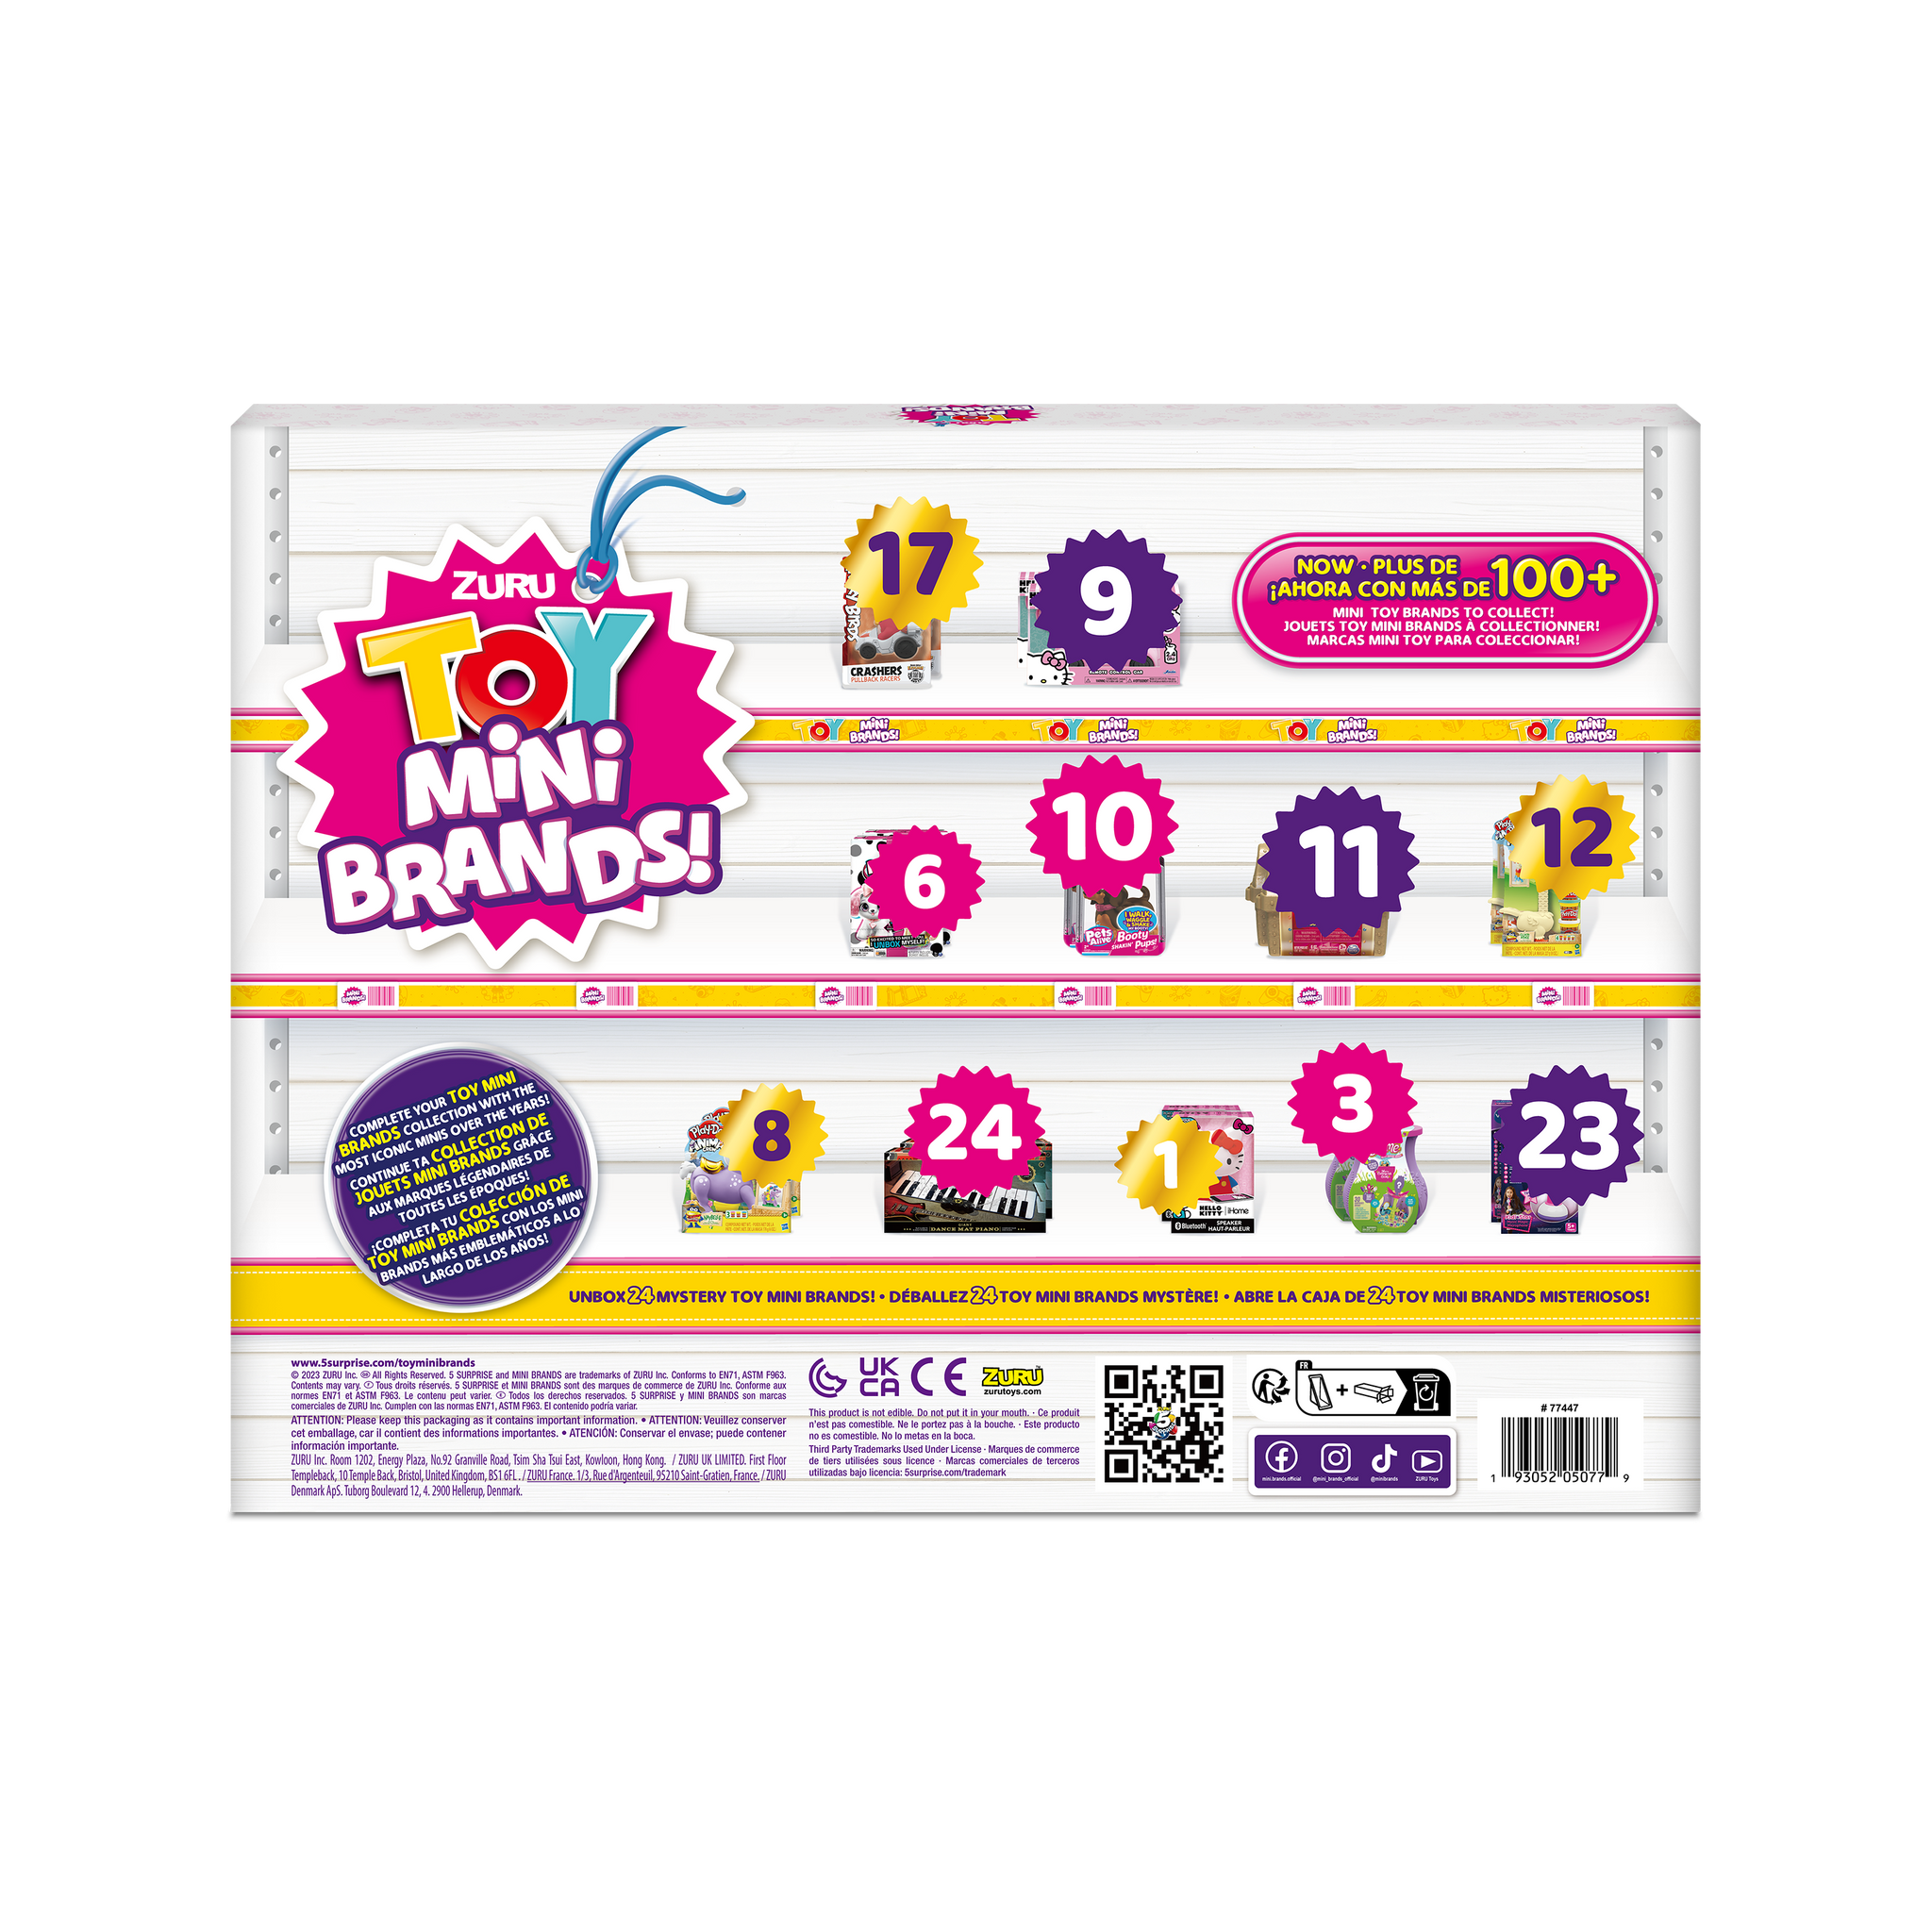 ZURU 5 SURPRISE- TOY MINI BRANDS- S3 ADVENT CALENDAR with 4 Exclusive –  Colossal Toys Inc.